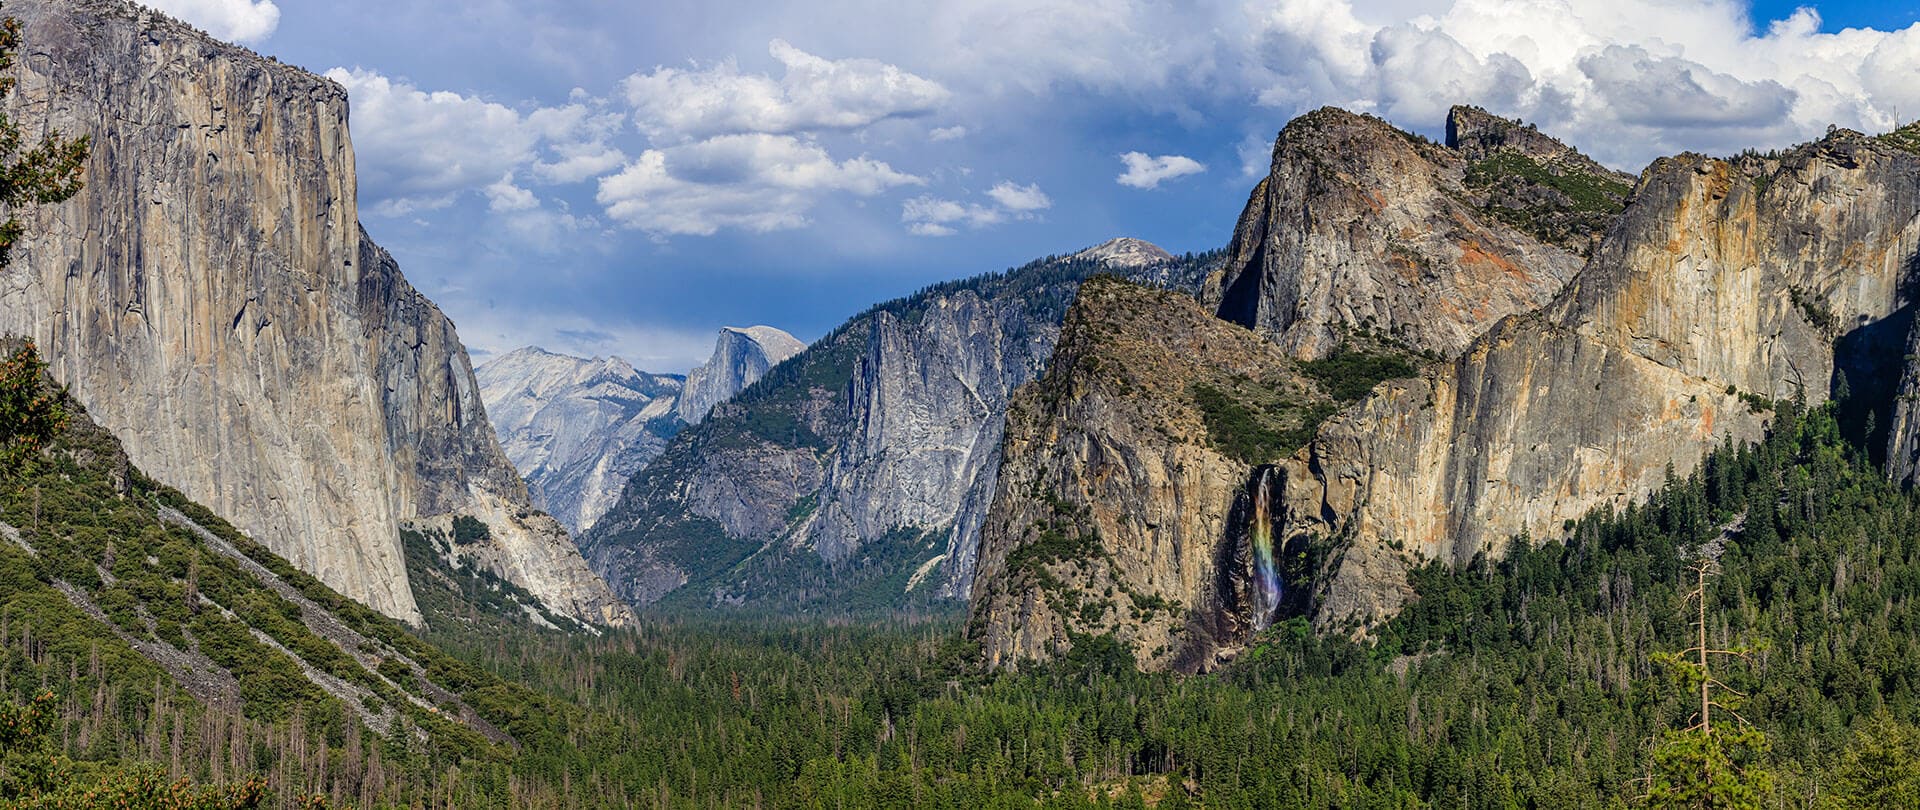 7 Tips to a Great Yosemite Visit this Summer